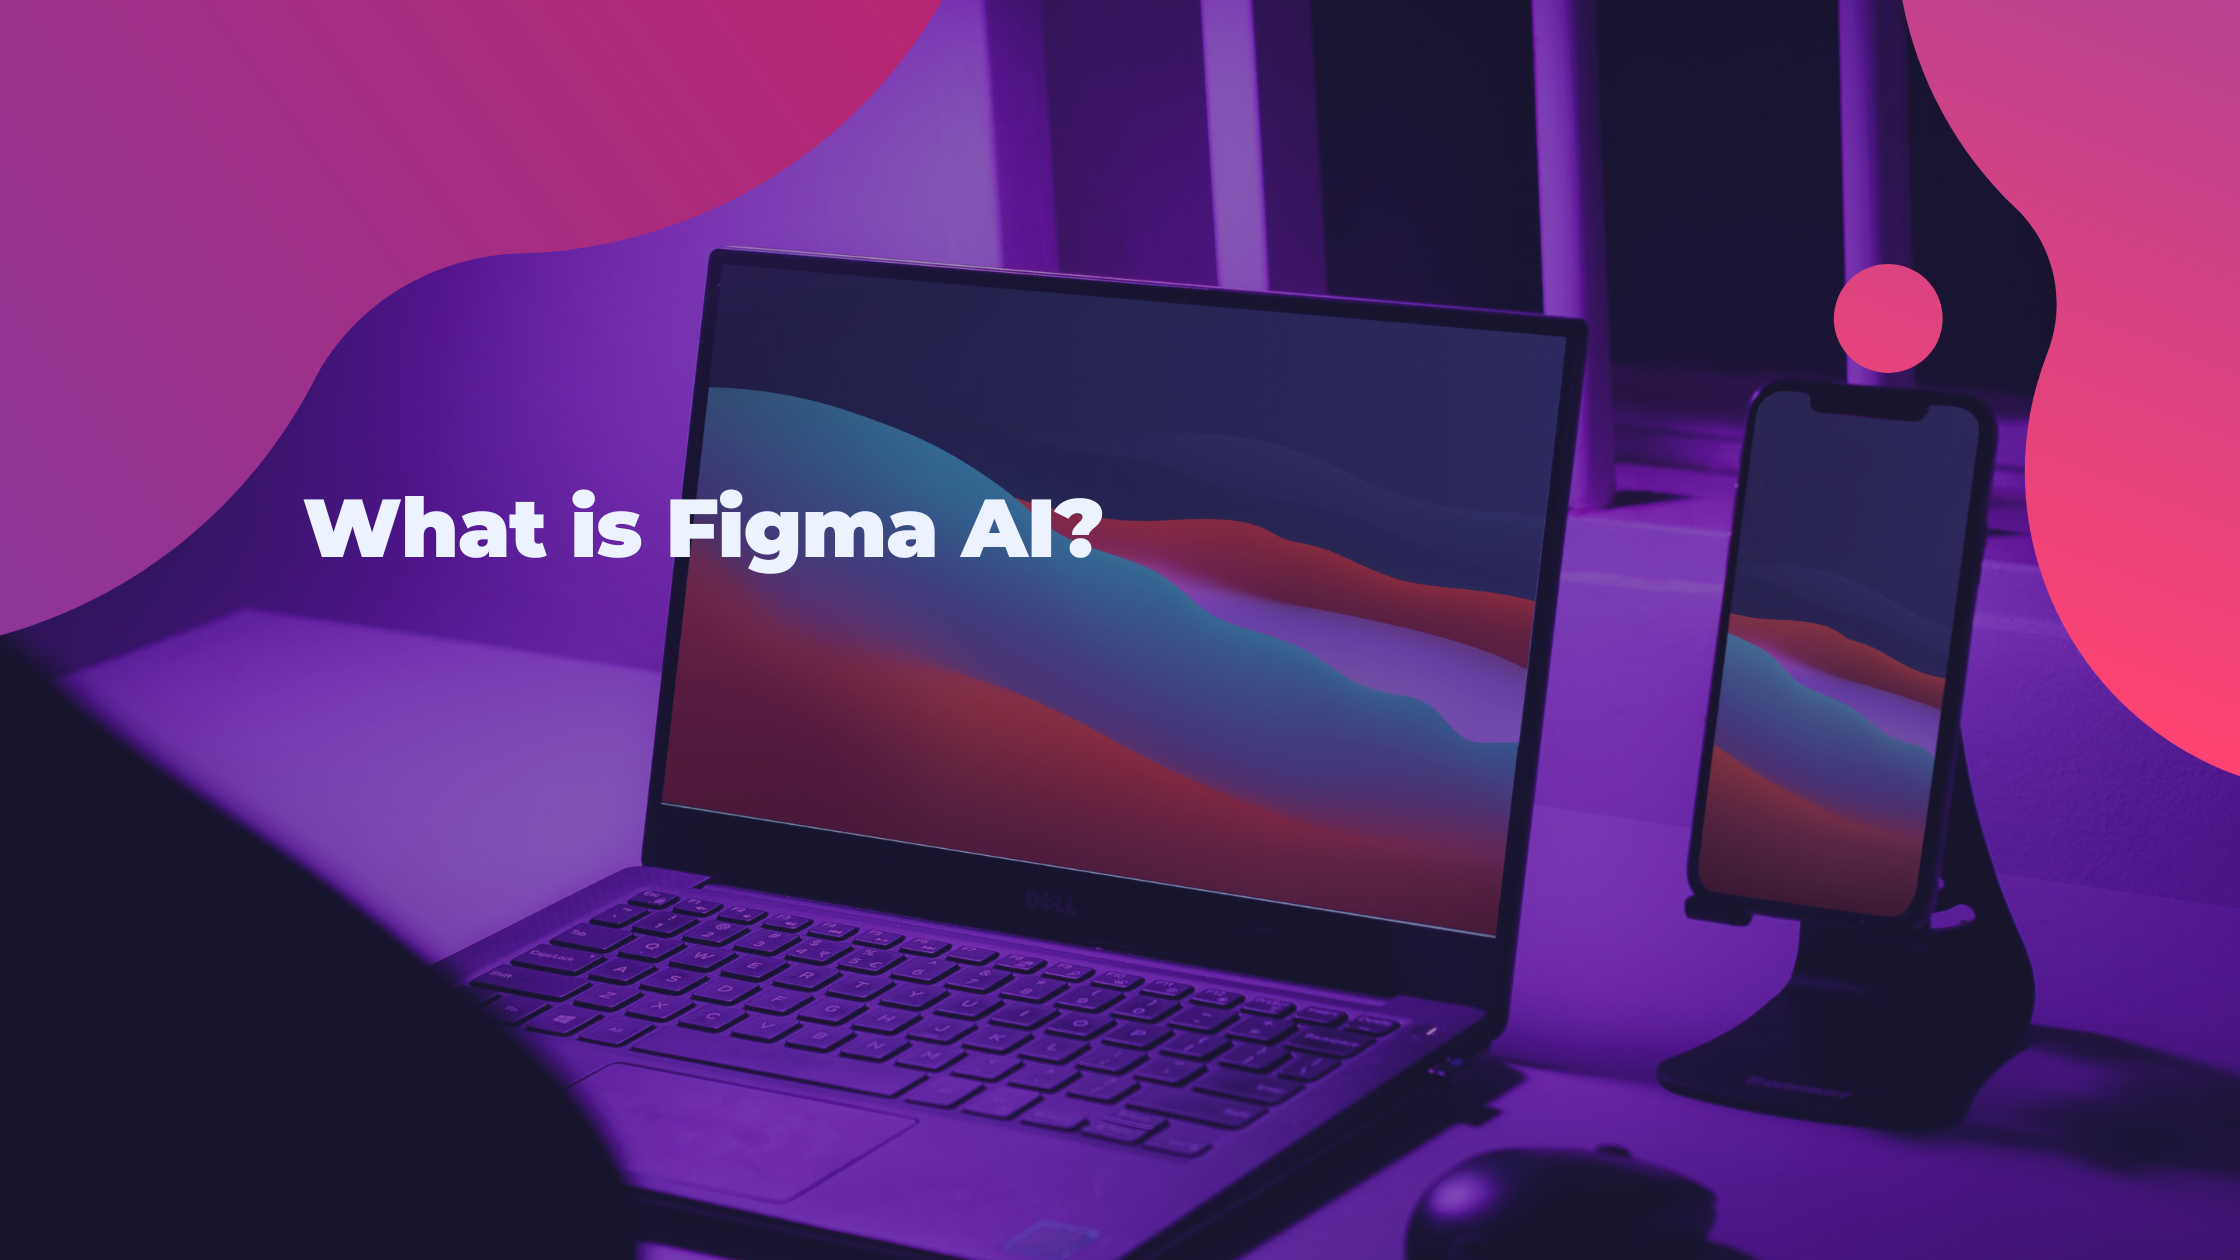 What is Figma AI?